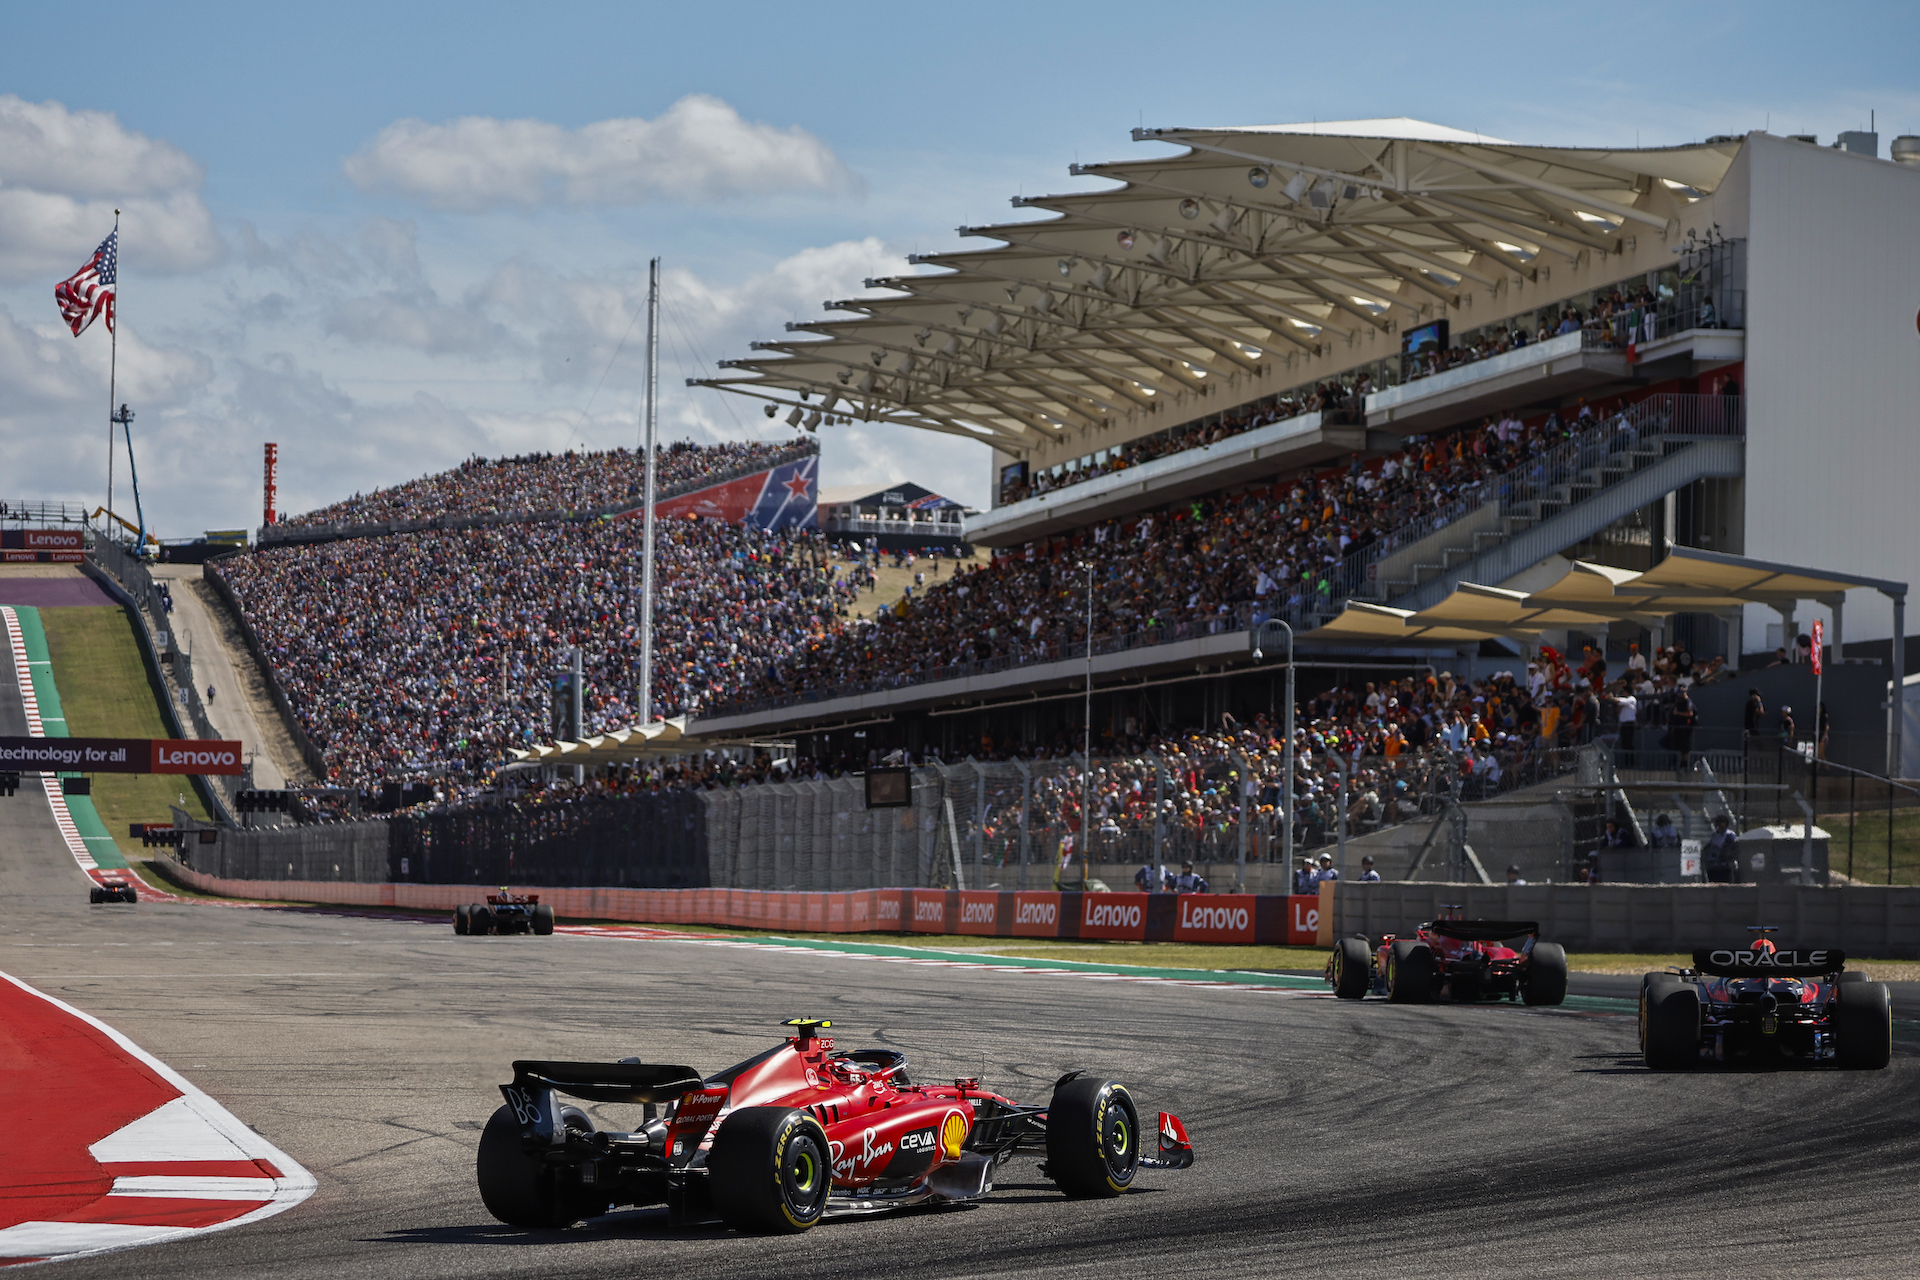 Charles Leclerc leads Max Verstappen and Carlos Sainz through a corner on the Austin circuit. They're about to pass a towering grandstand before driving through the start/finish and up a steep hill past another grandstand, also packed with fans.